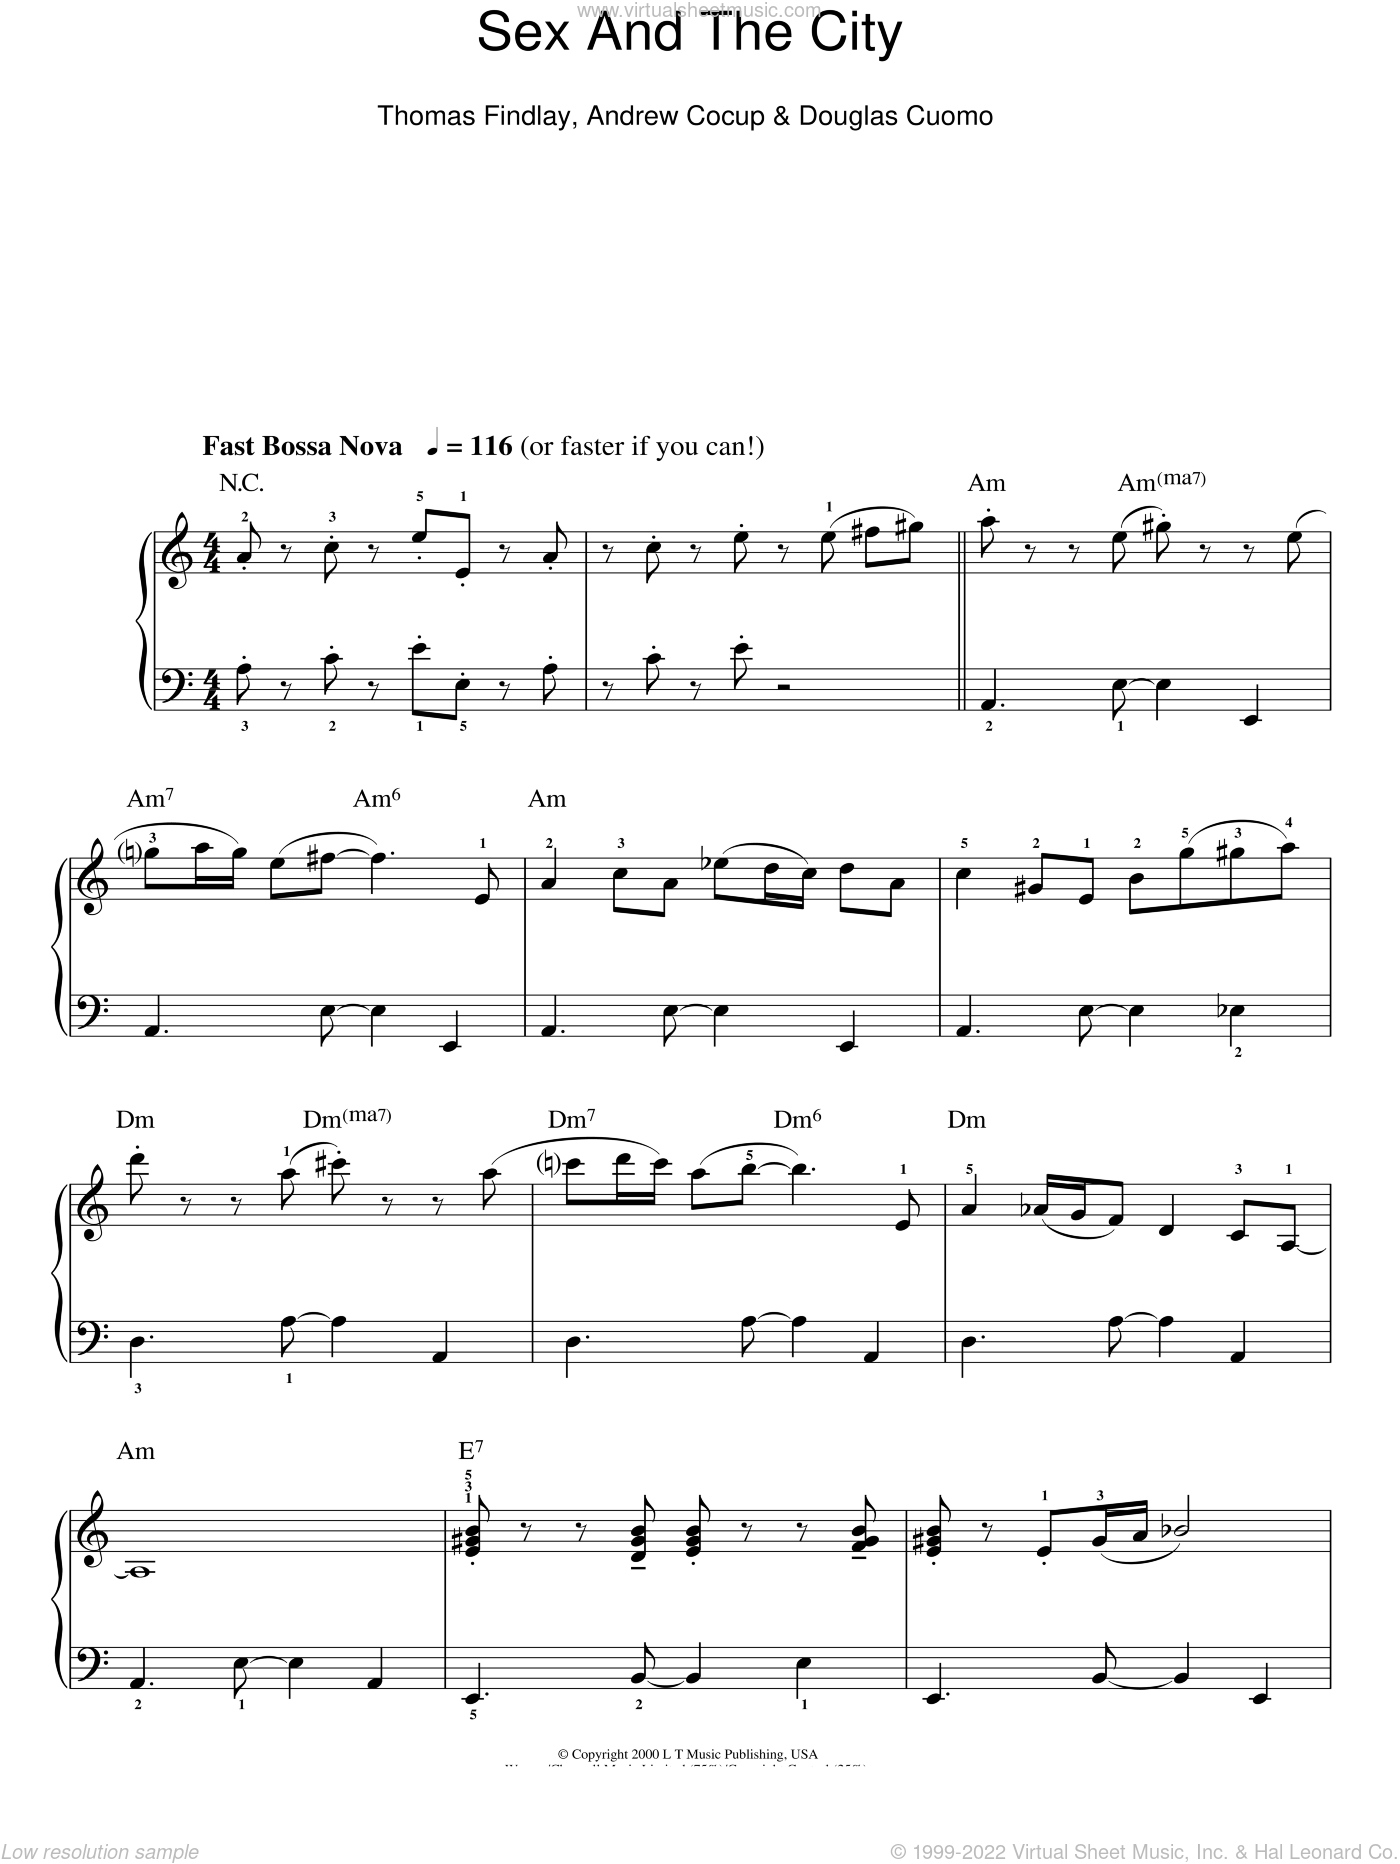 Findlay Theme From Sex And The City Sheet Music For